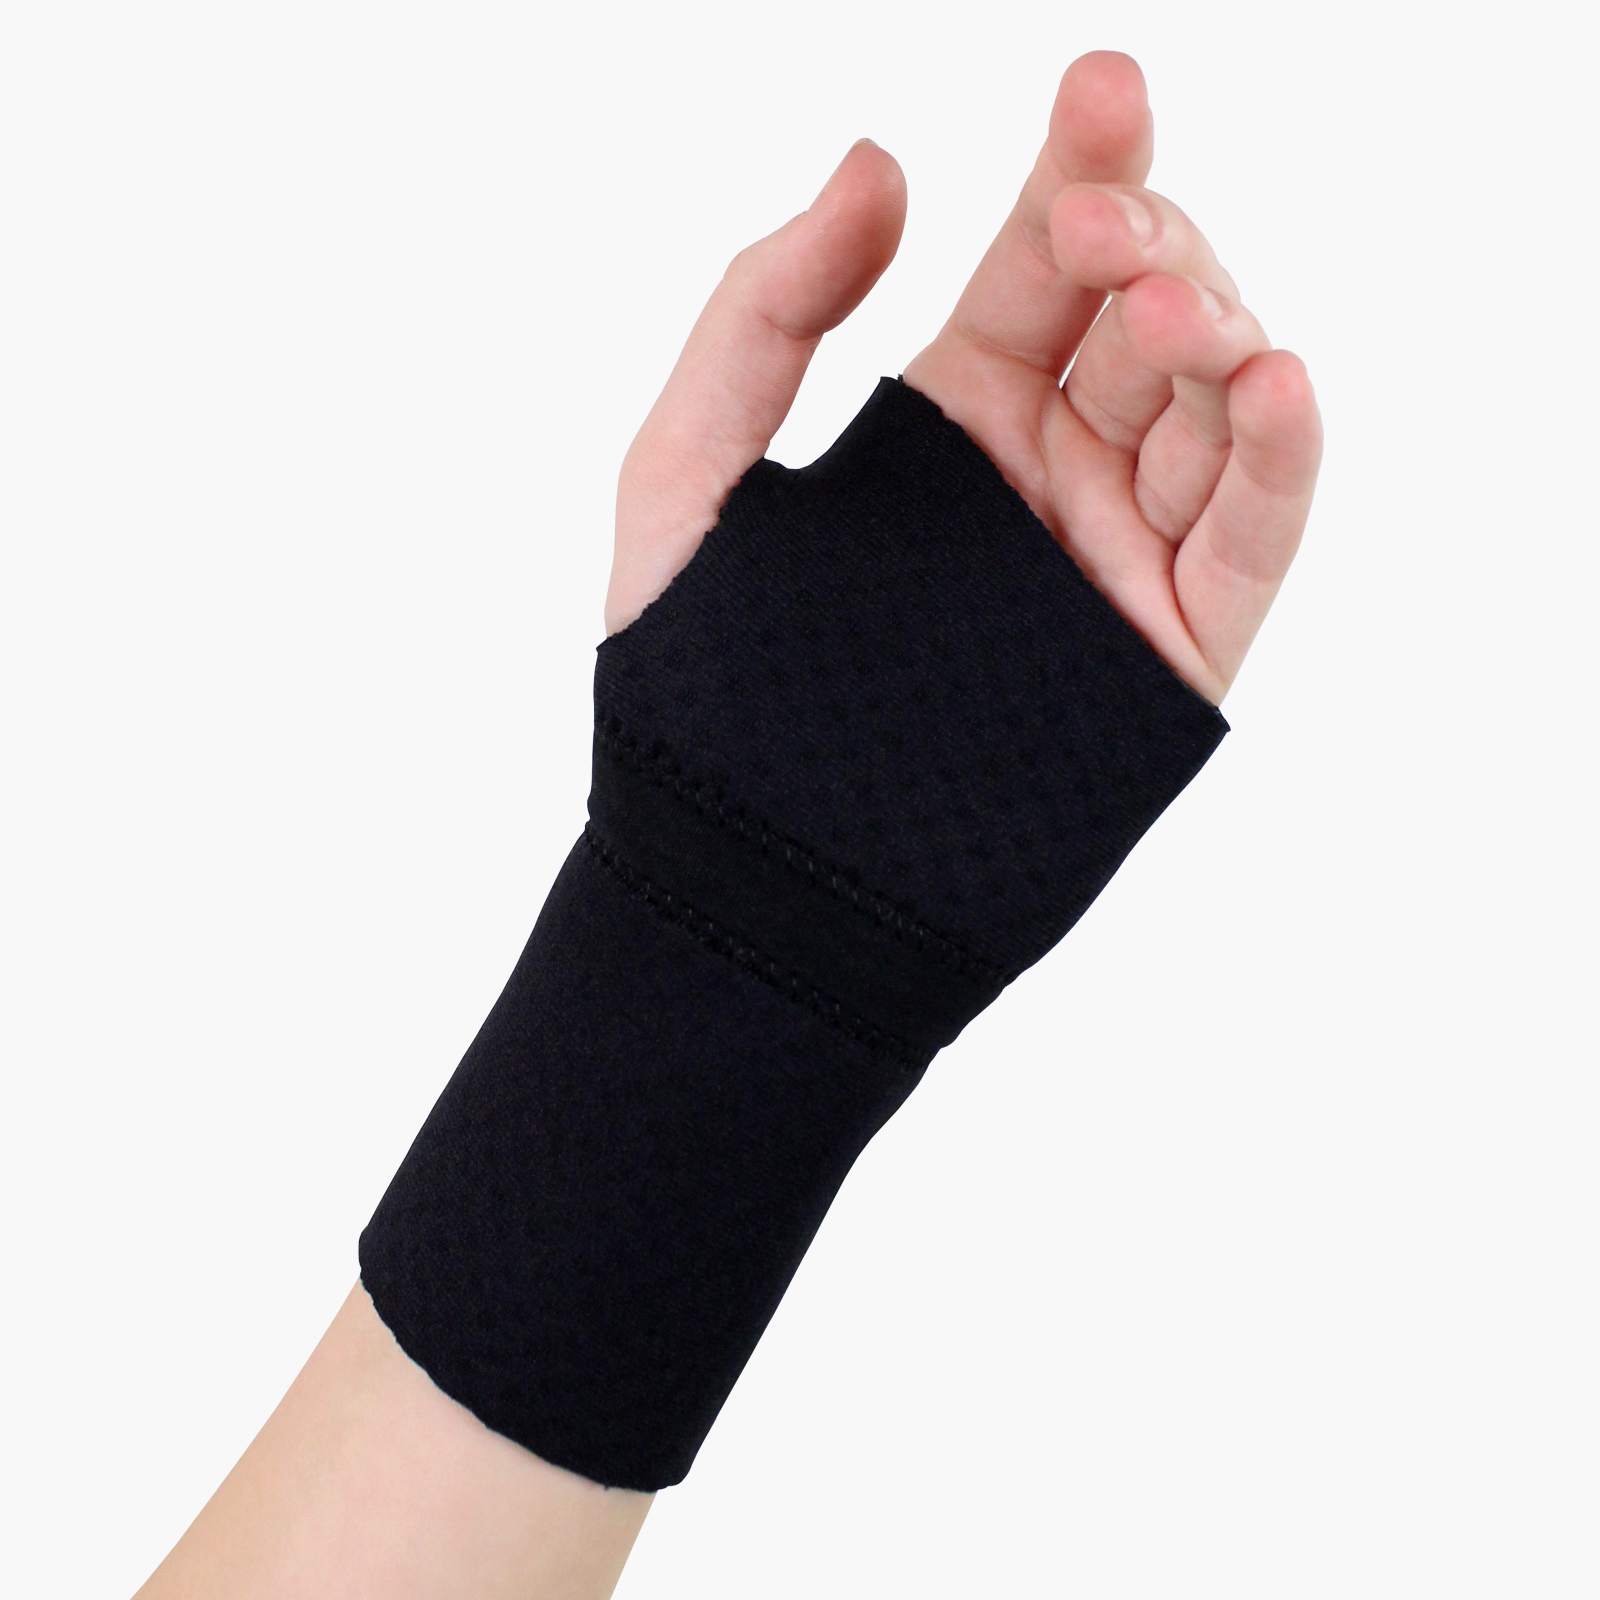 Therapy Wrist Support - Beagle Orthopaedic